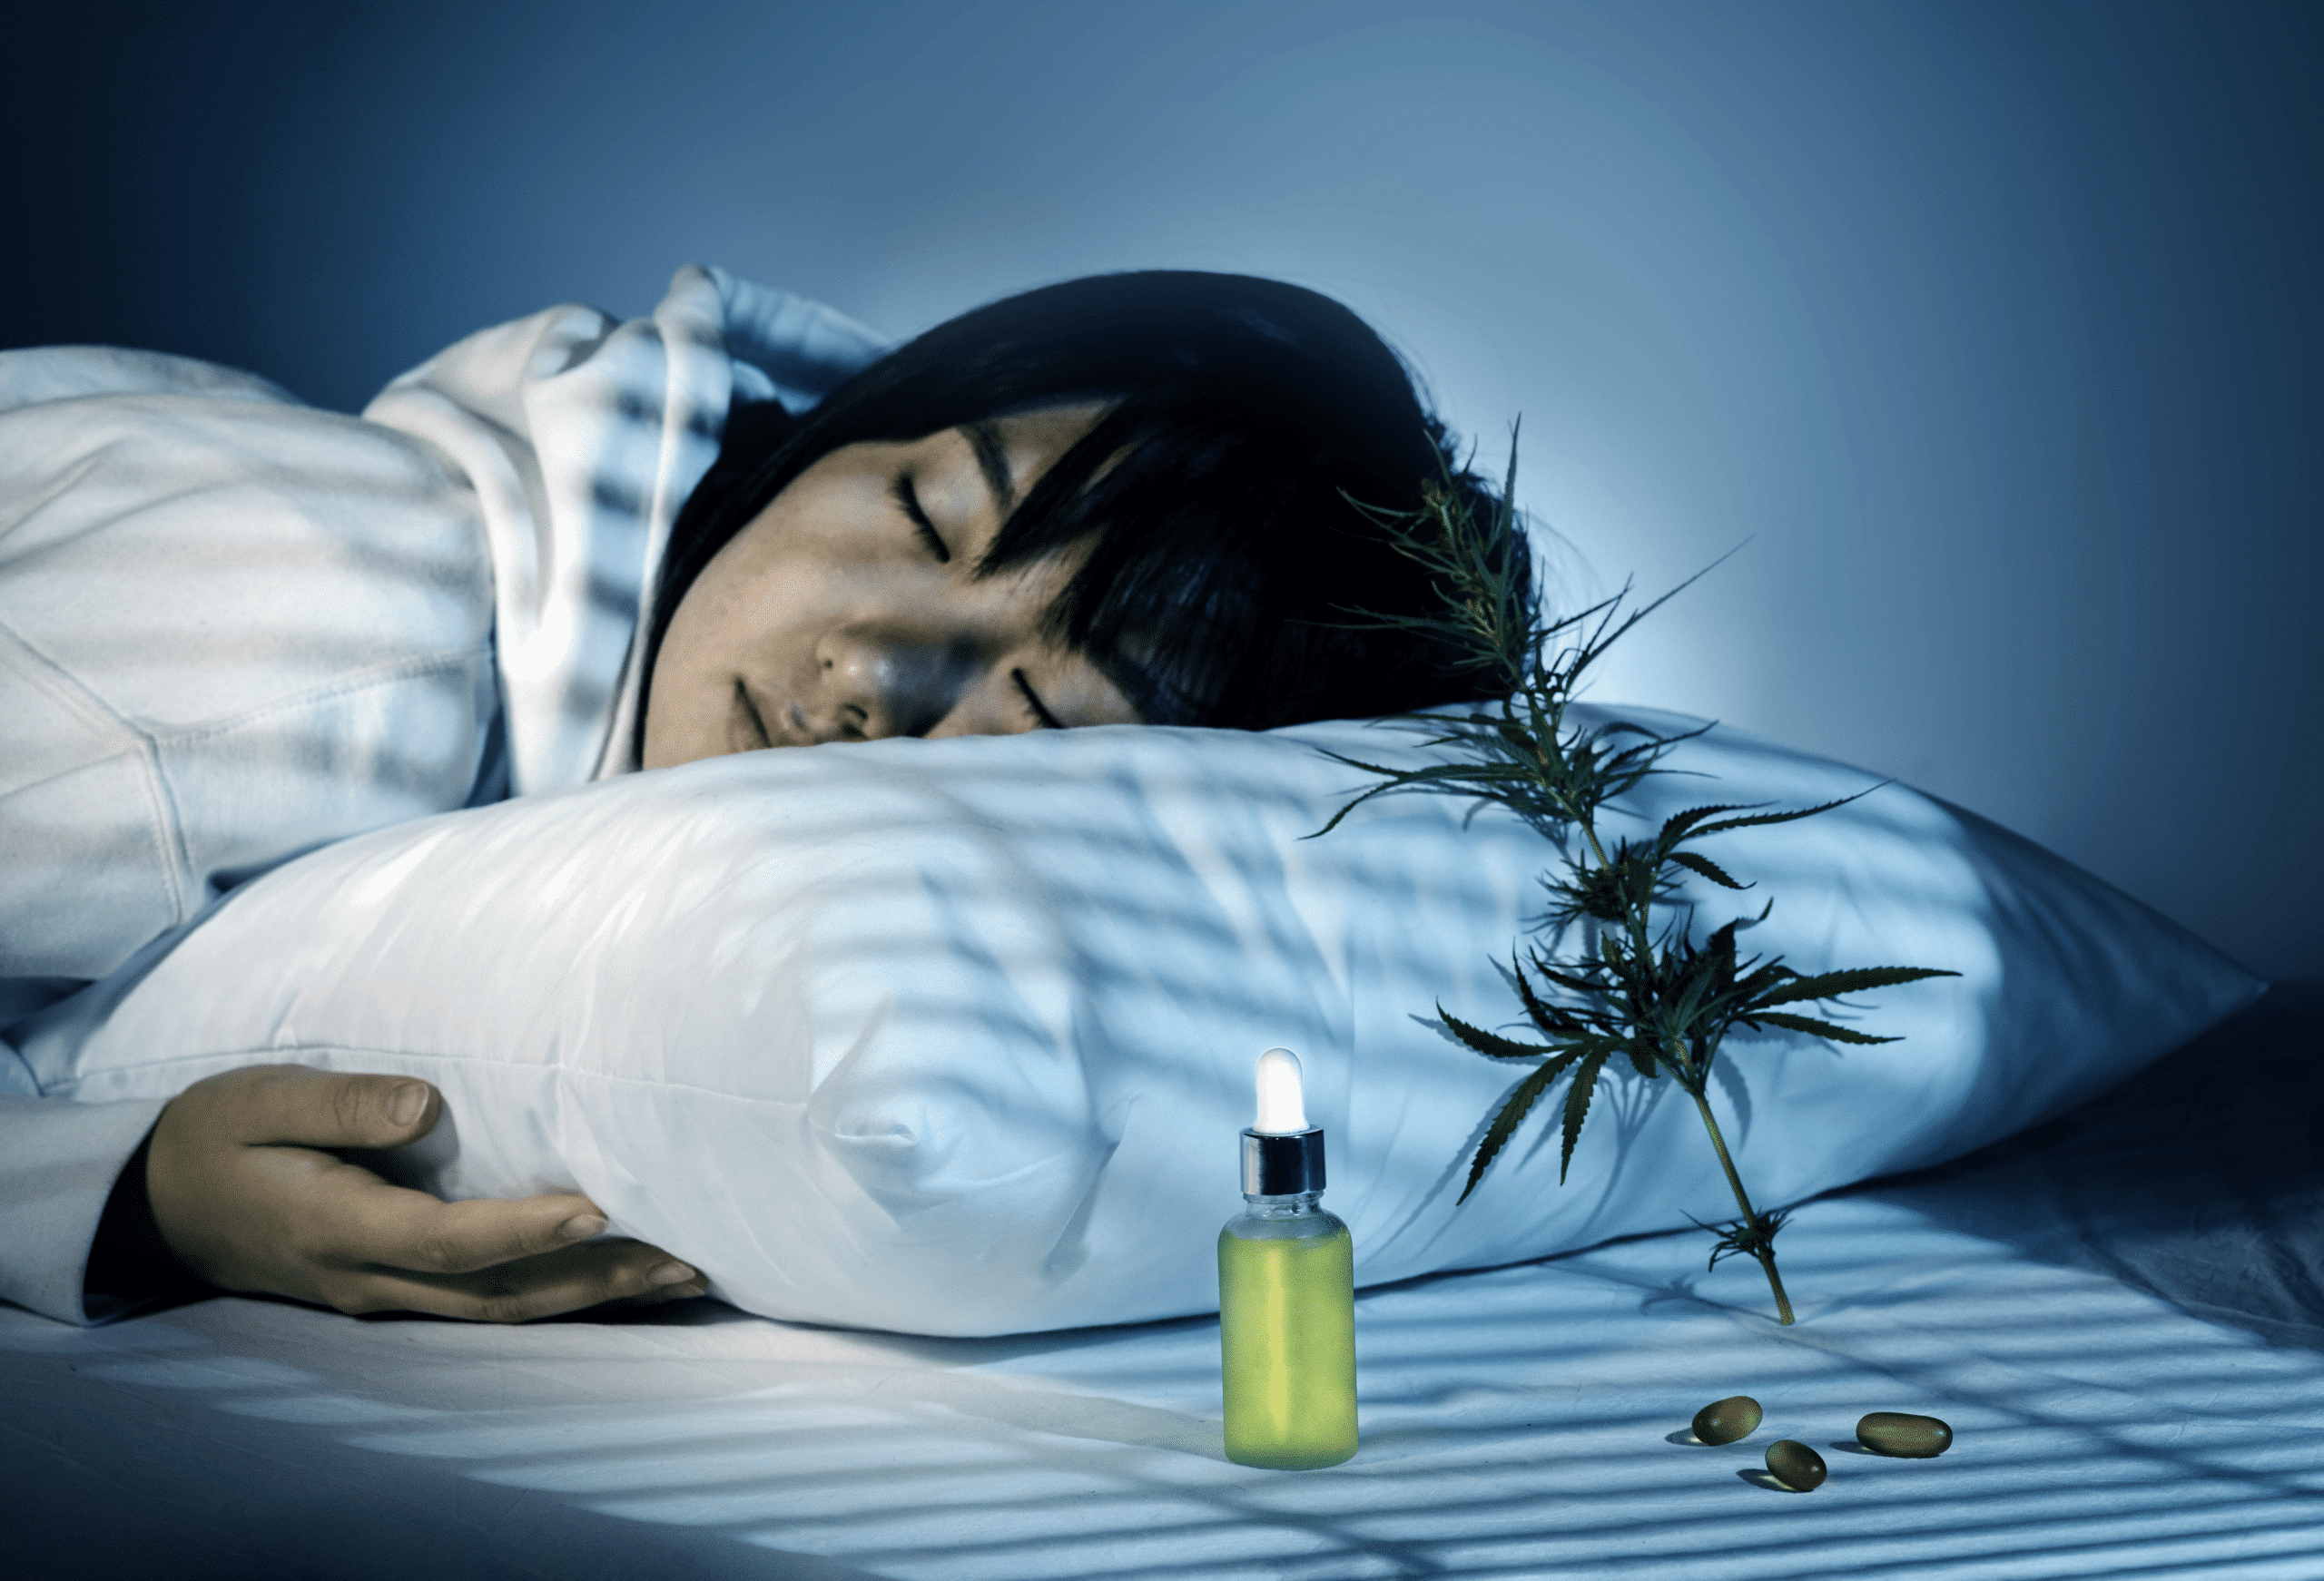 Treating Insomnia with Medical Cannabis: What You Need to Know